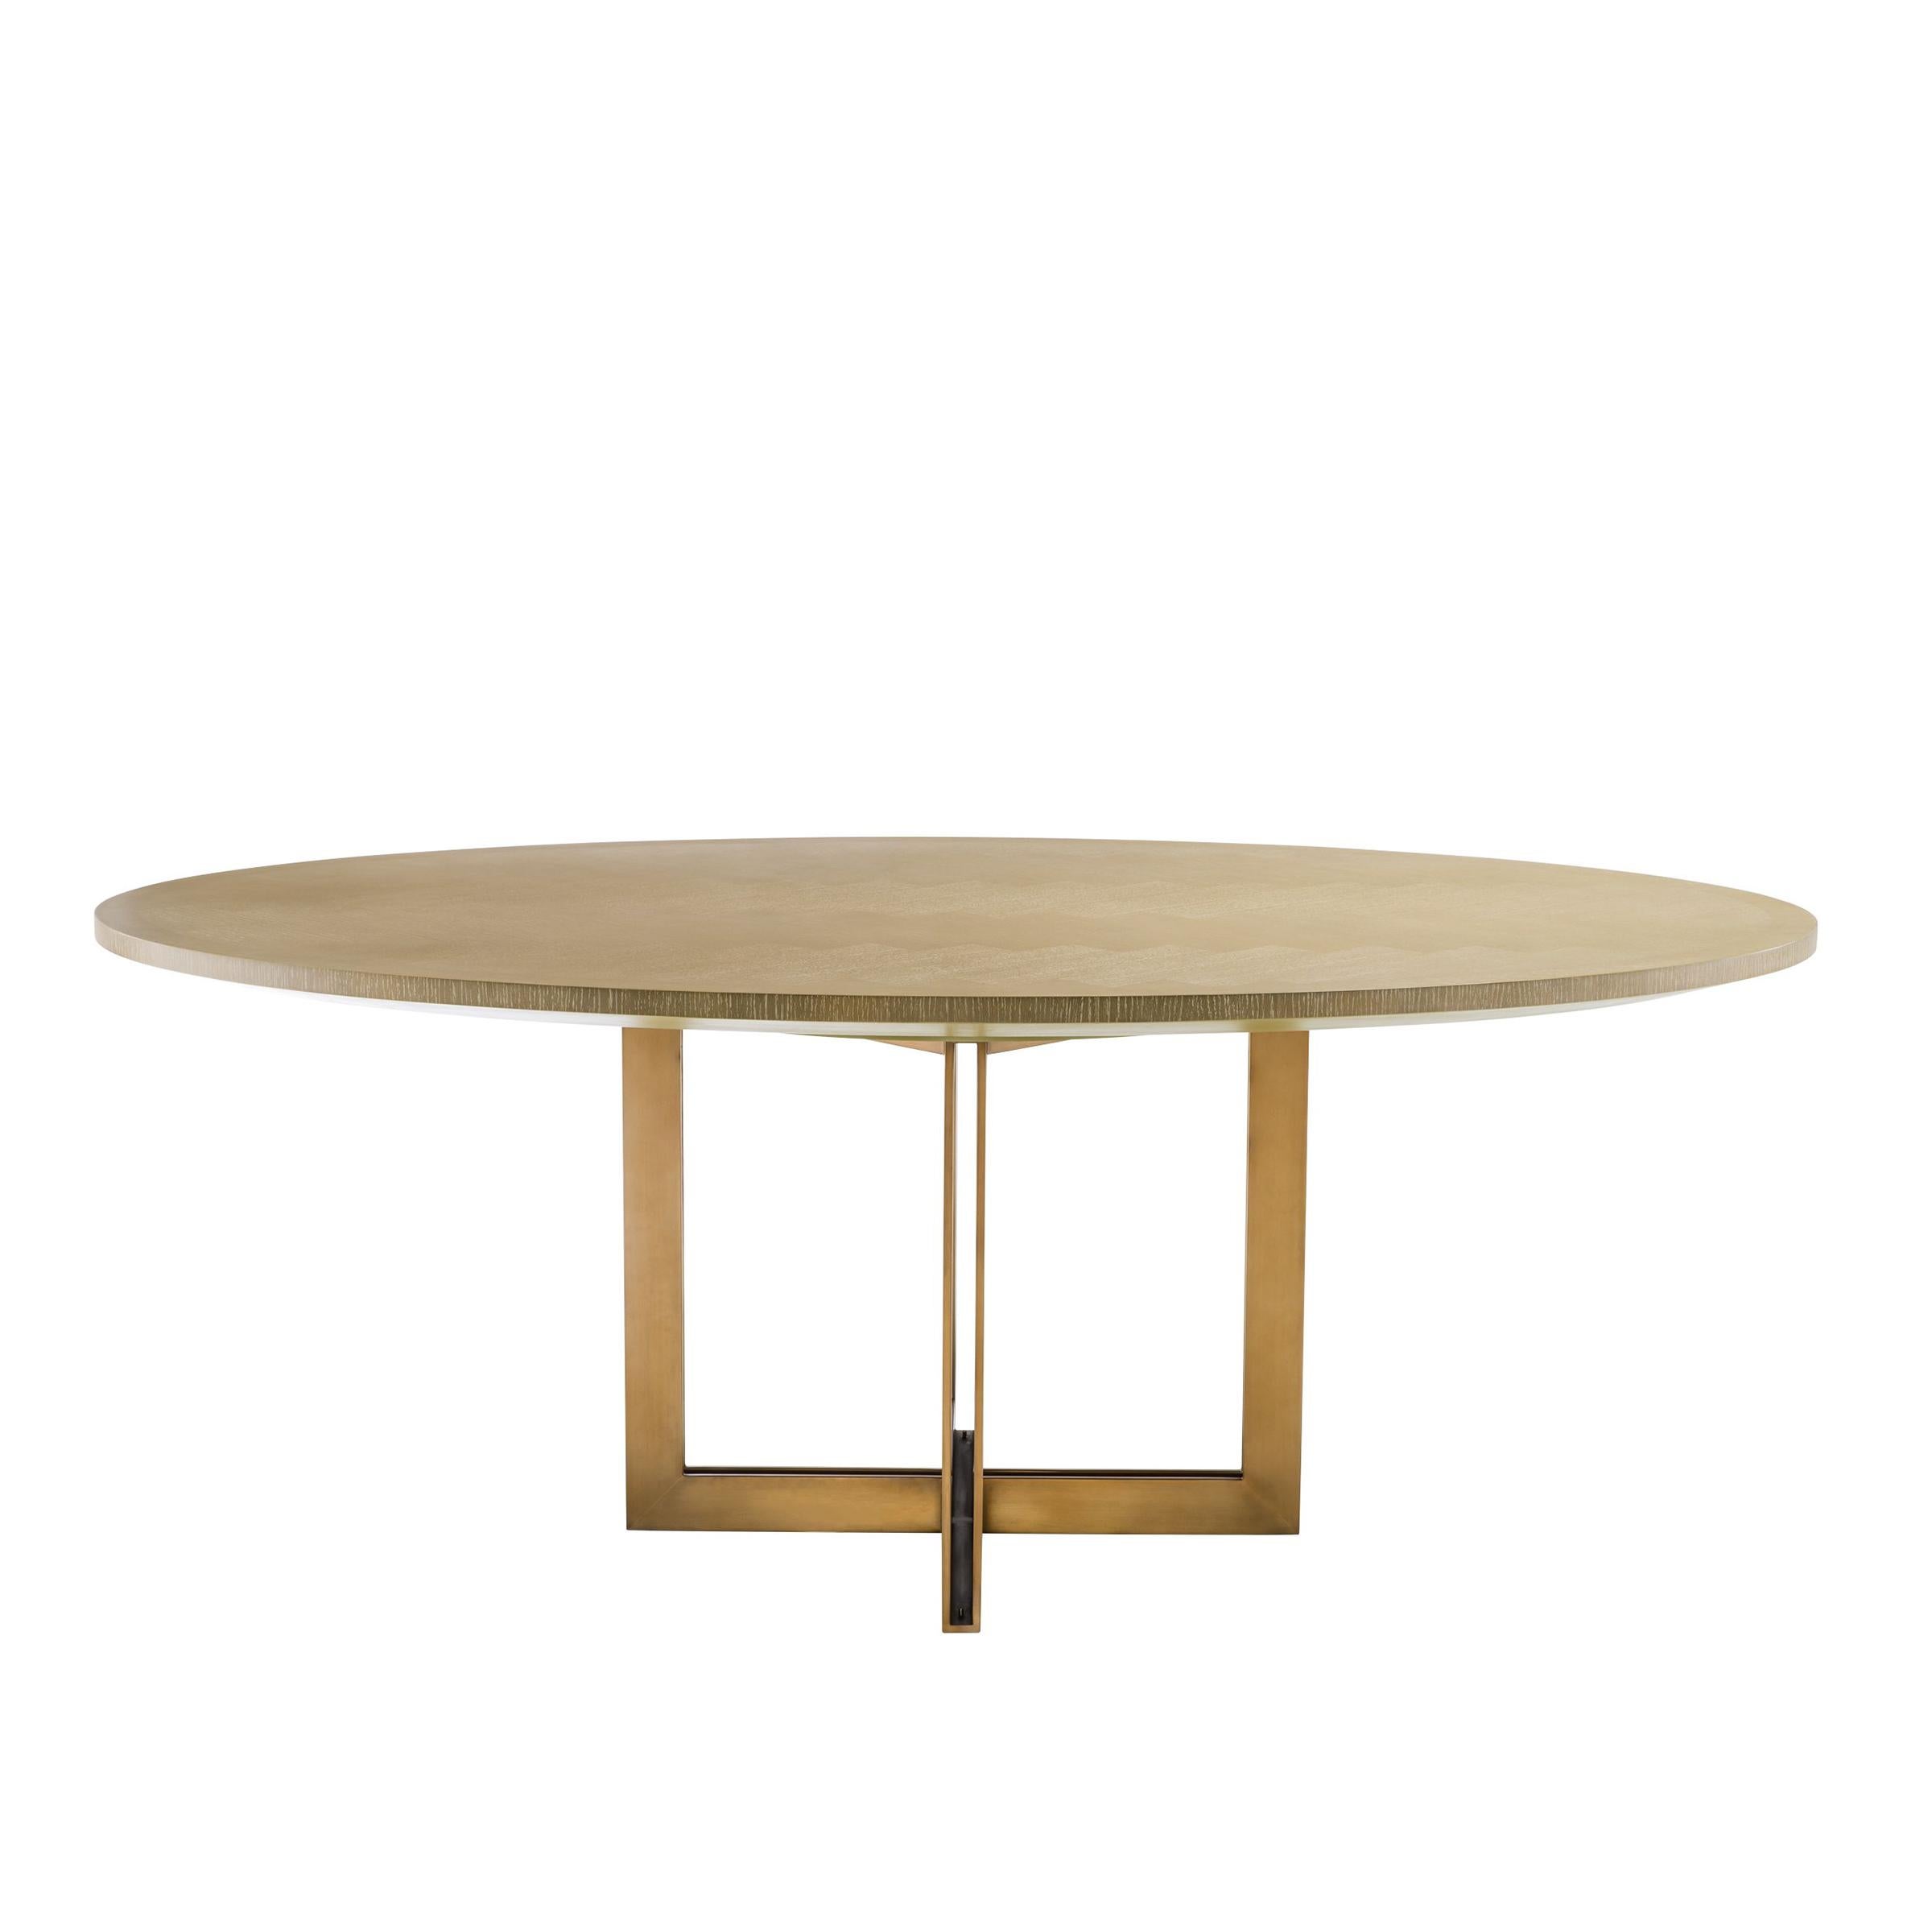 Indonesian Brass Oval Dining Table